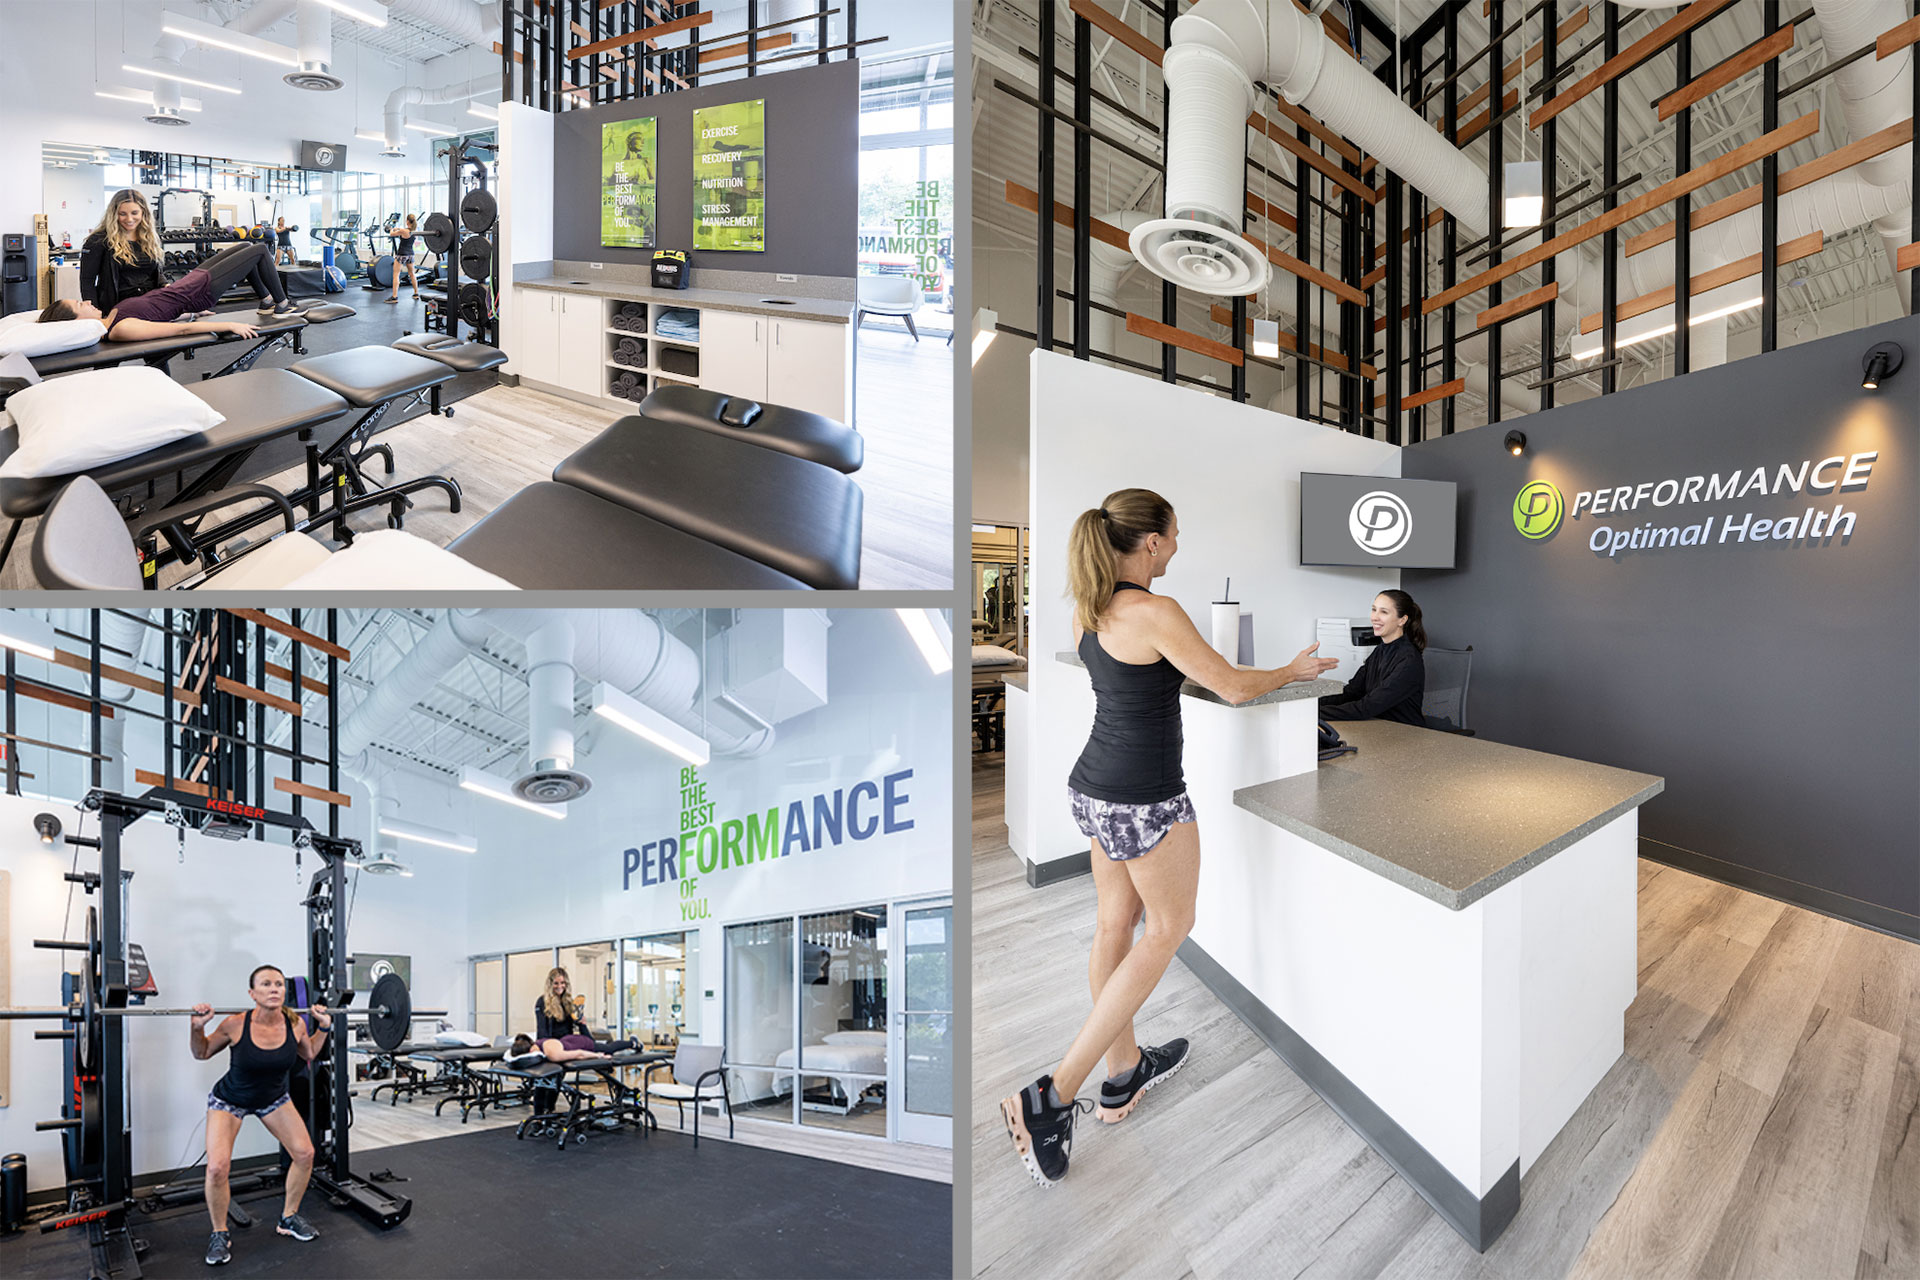 Performance Optimal Health opens second Naples location
